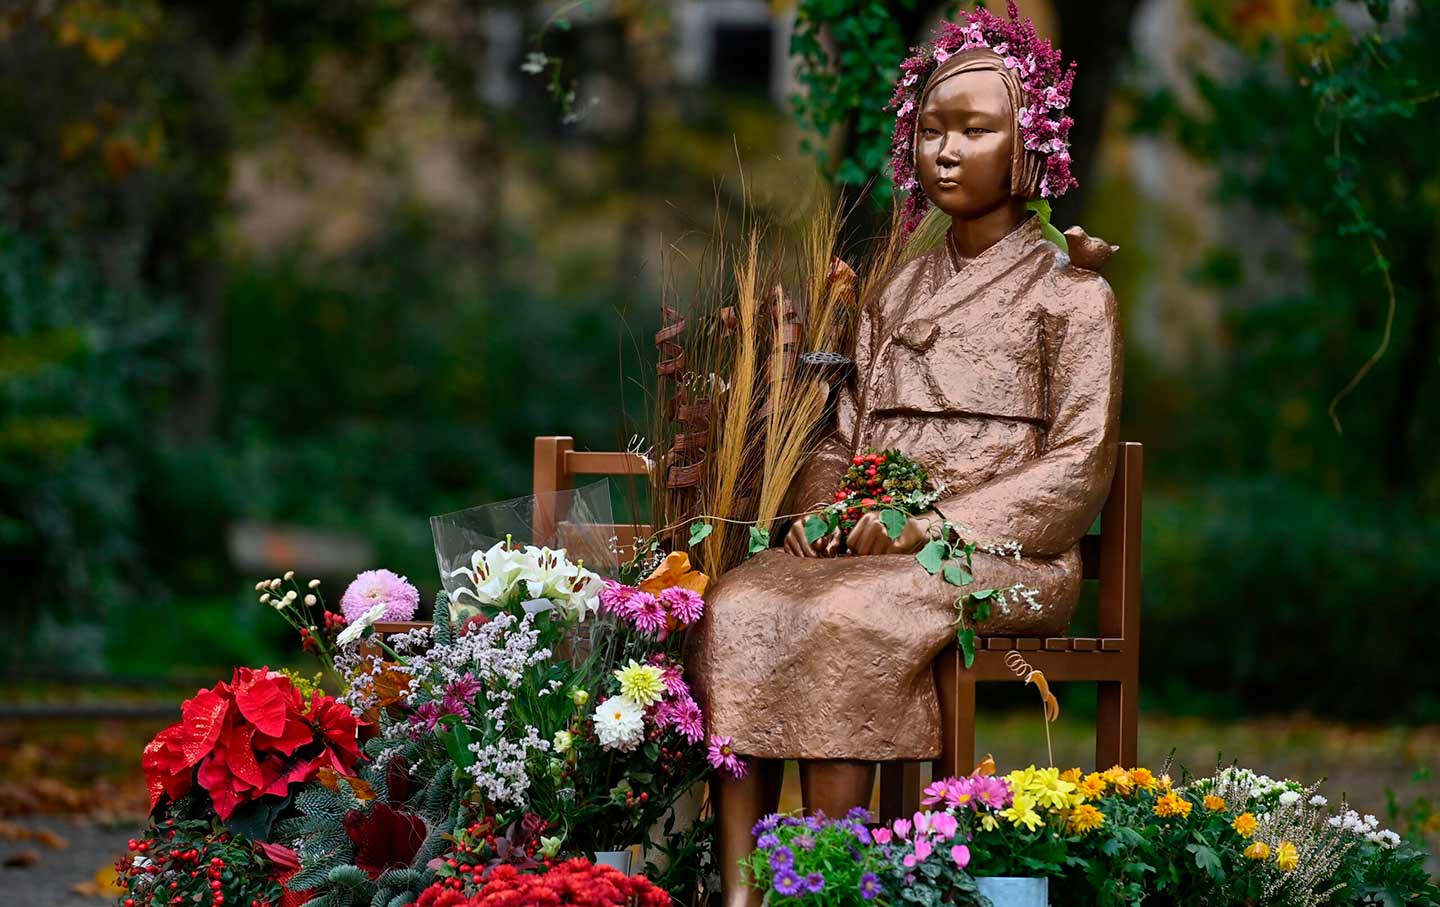 The Fight Over Berlin's Comfort Woman Statue